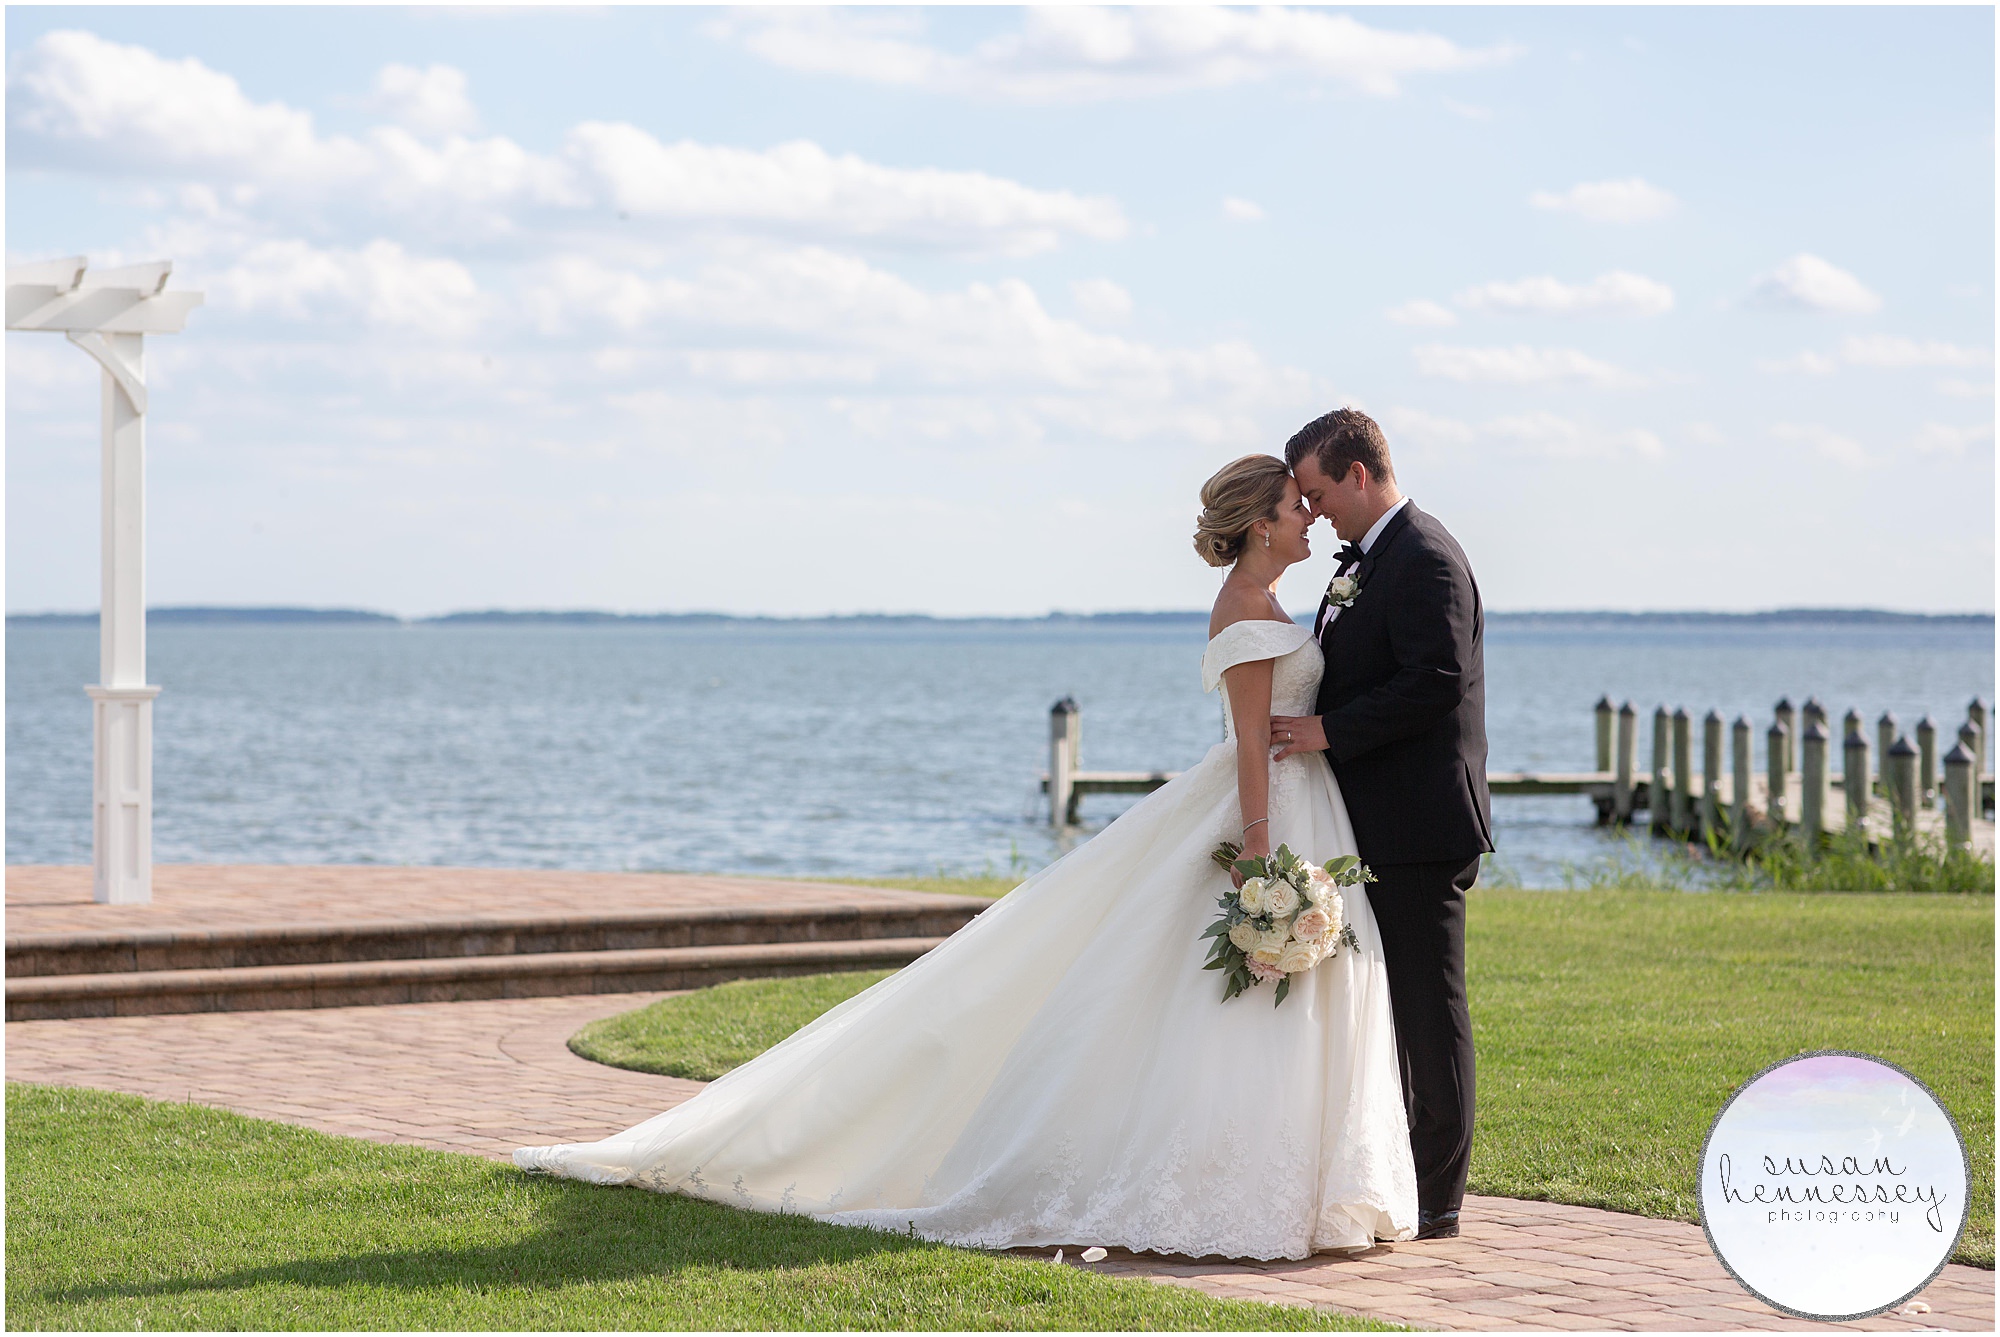 Couple pose in front of waterfront on their wedding day